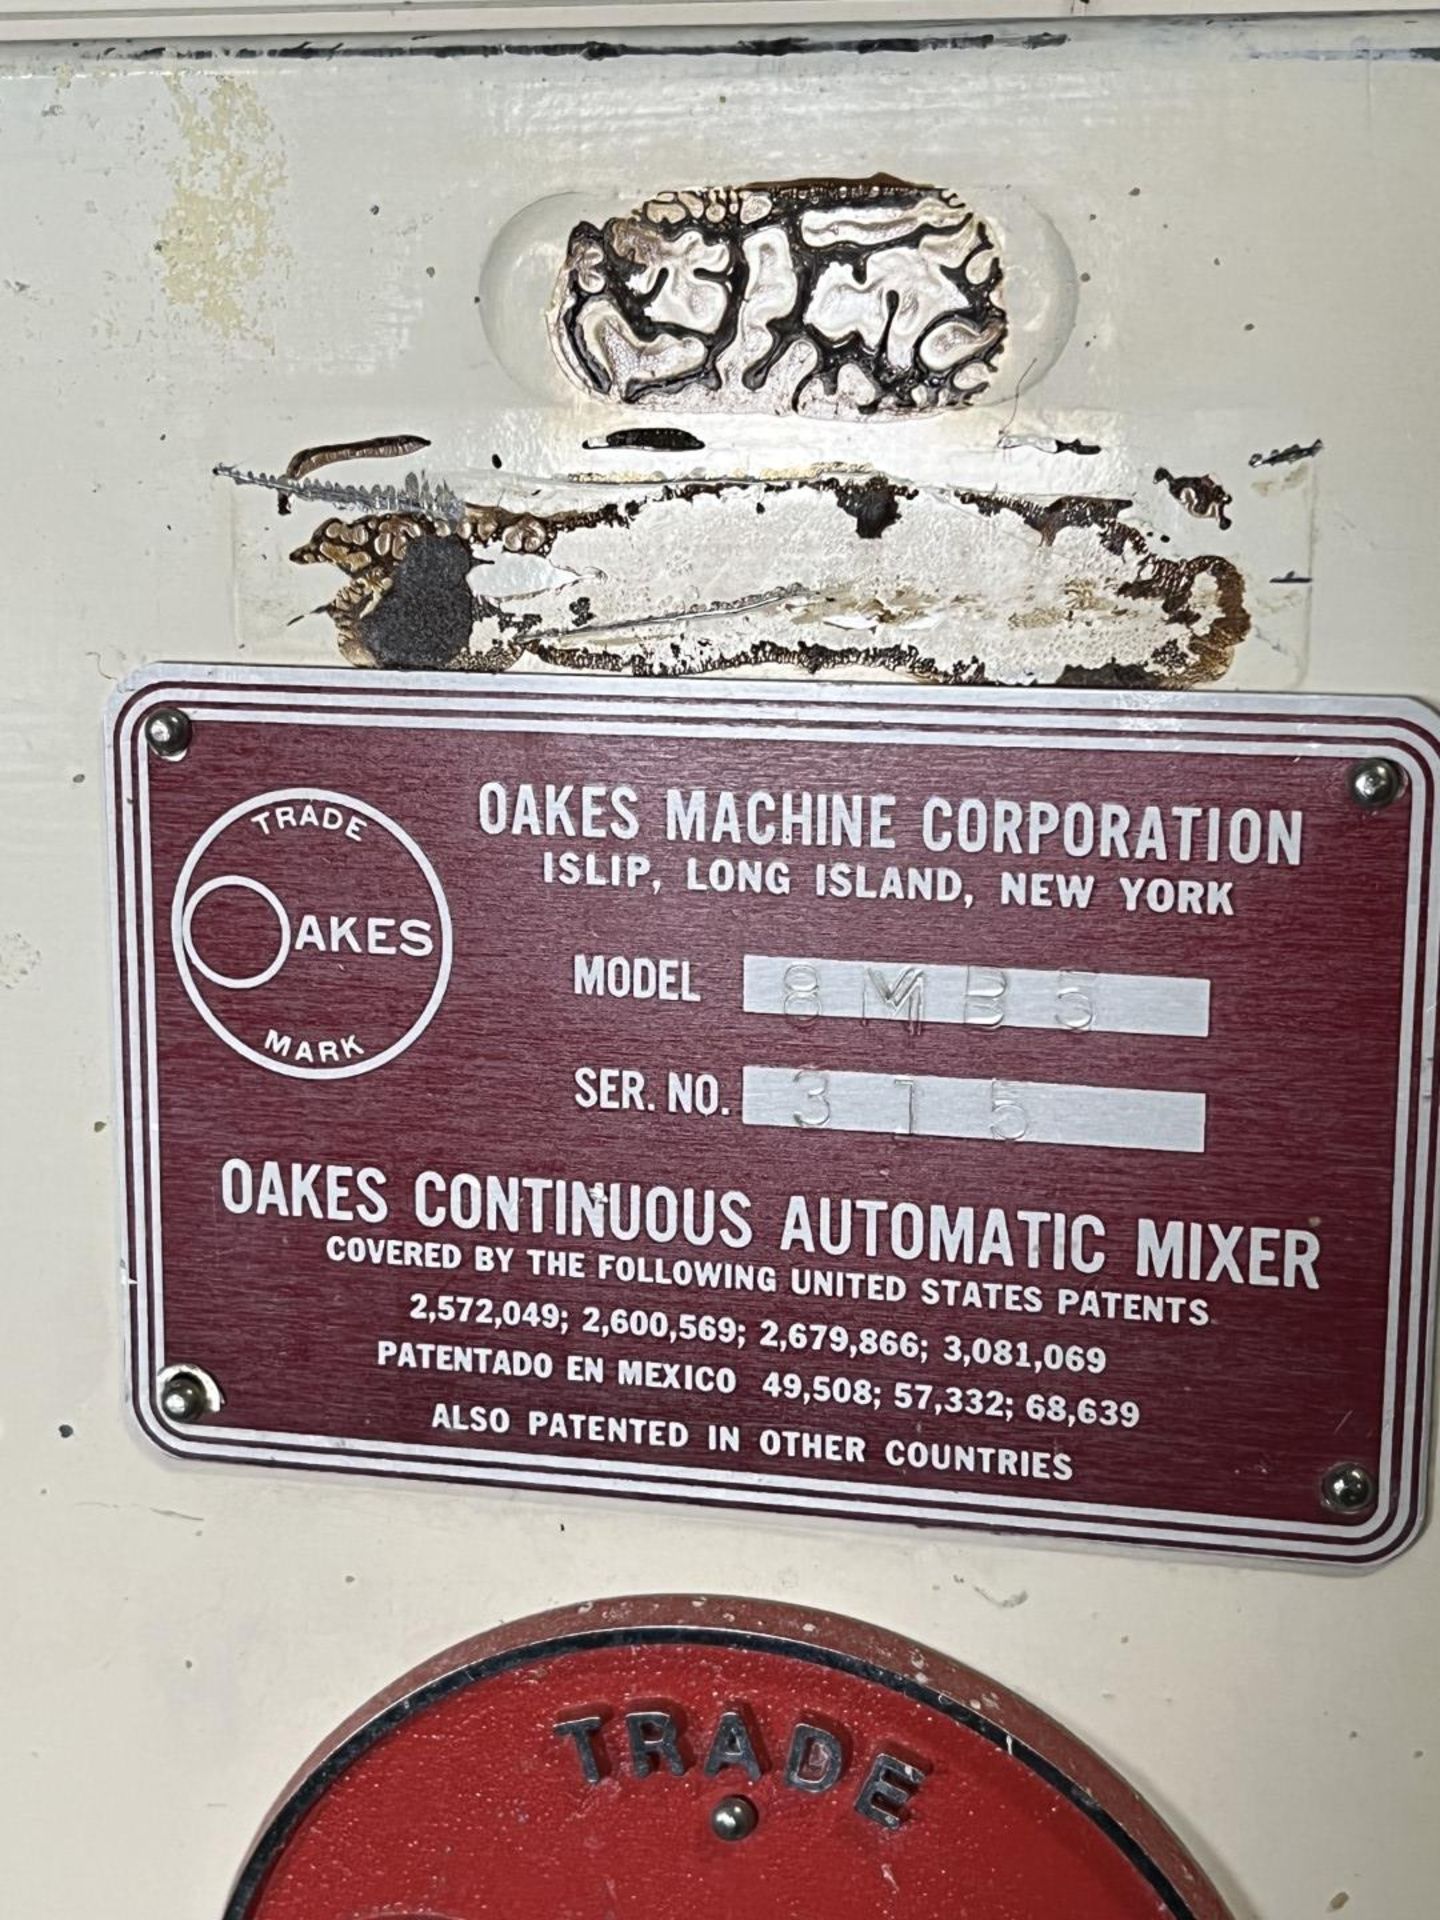 5 HP Oakes Continuous Mixer, Model 8MB5 - Image 2 of 6